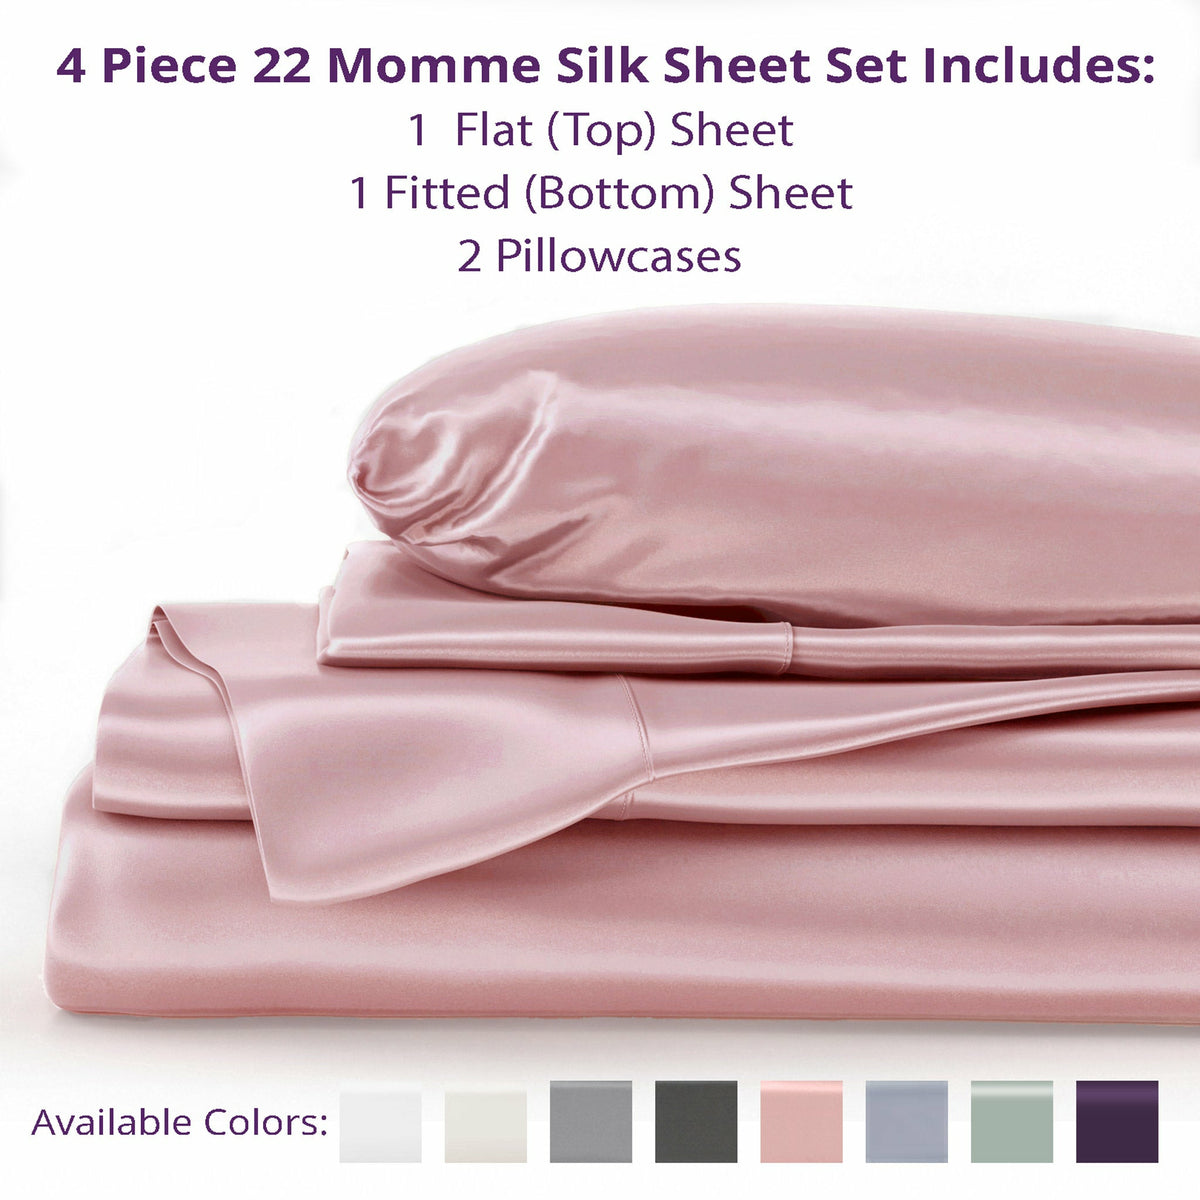 Mulberry Park Silks 22 Momme Silk Fitted Sheets Inclusions Rose Quartz Fine Linens